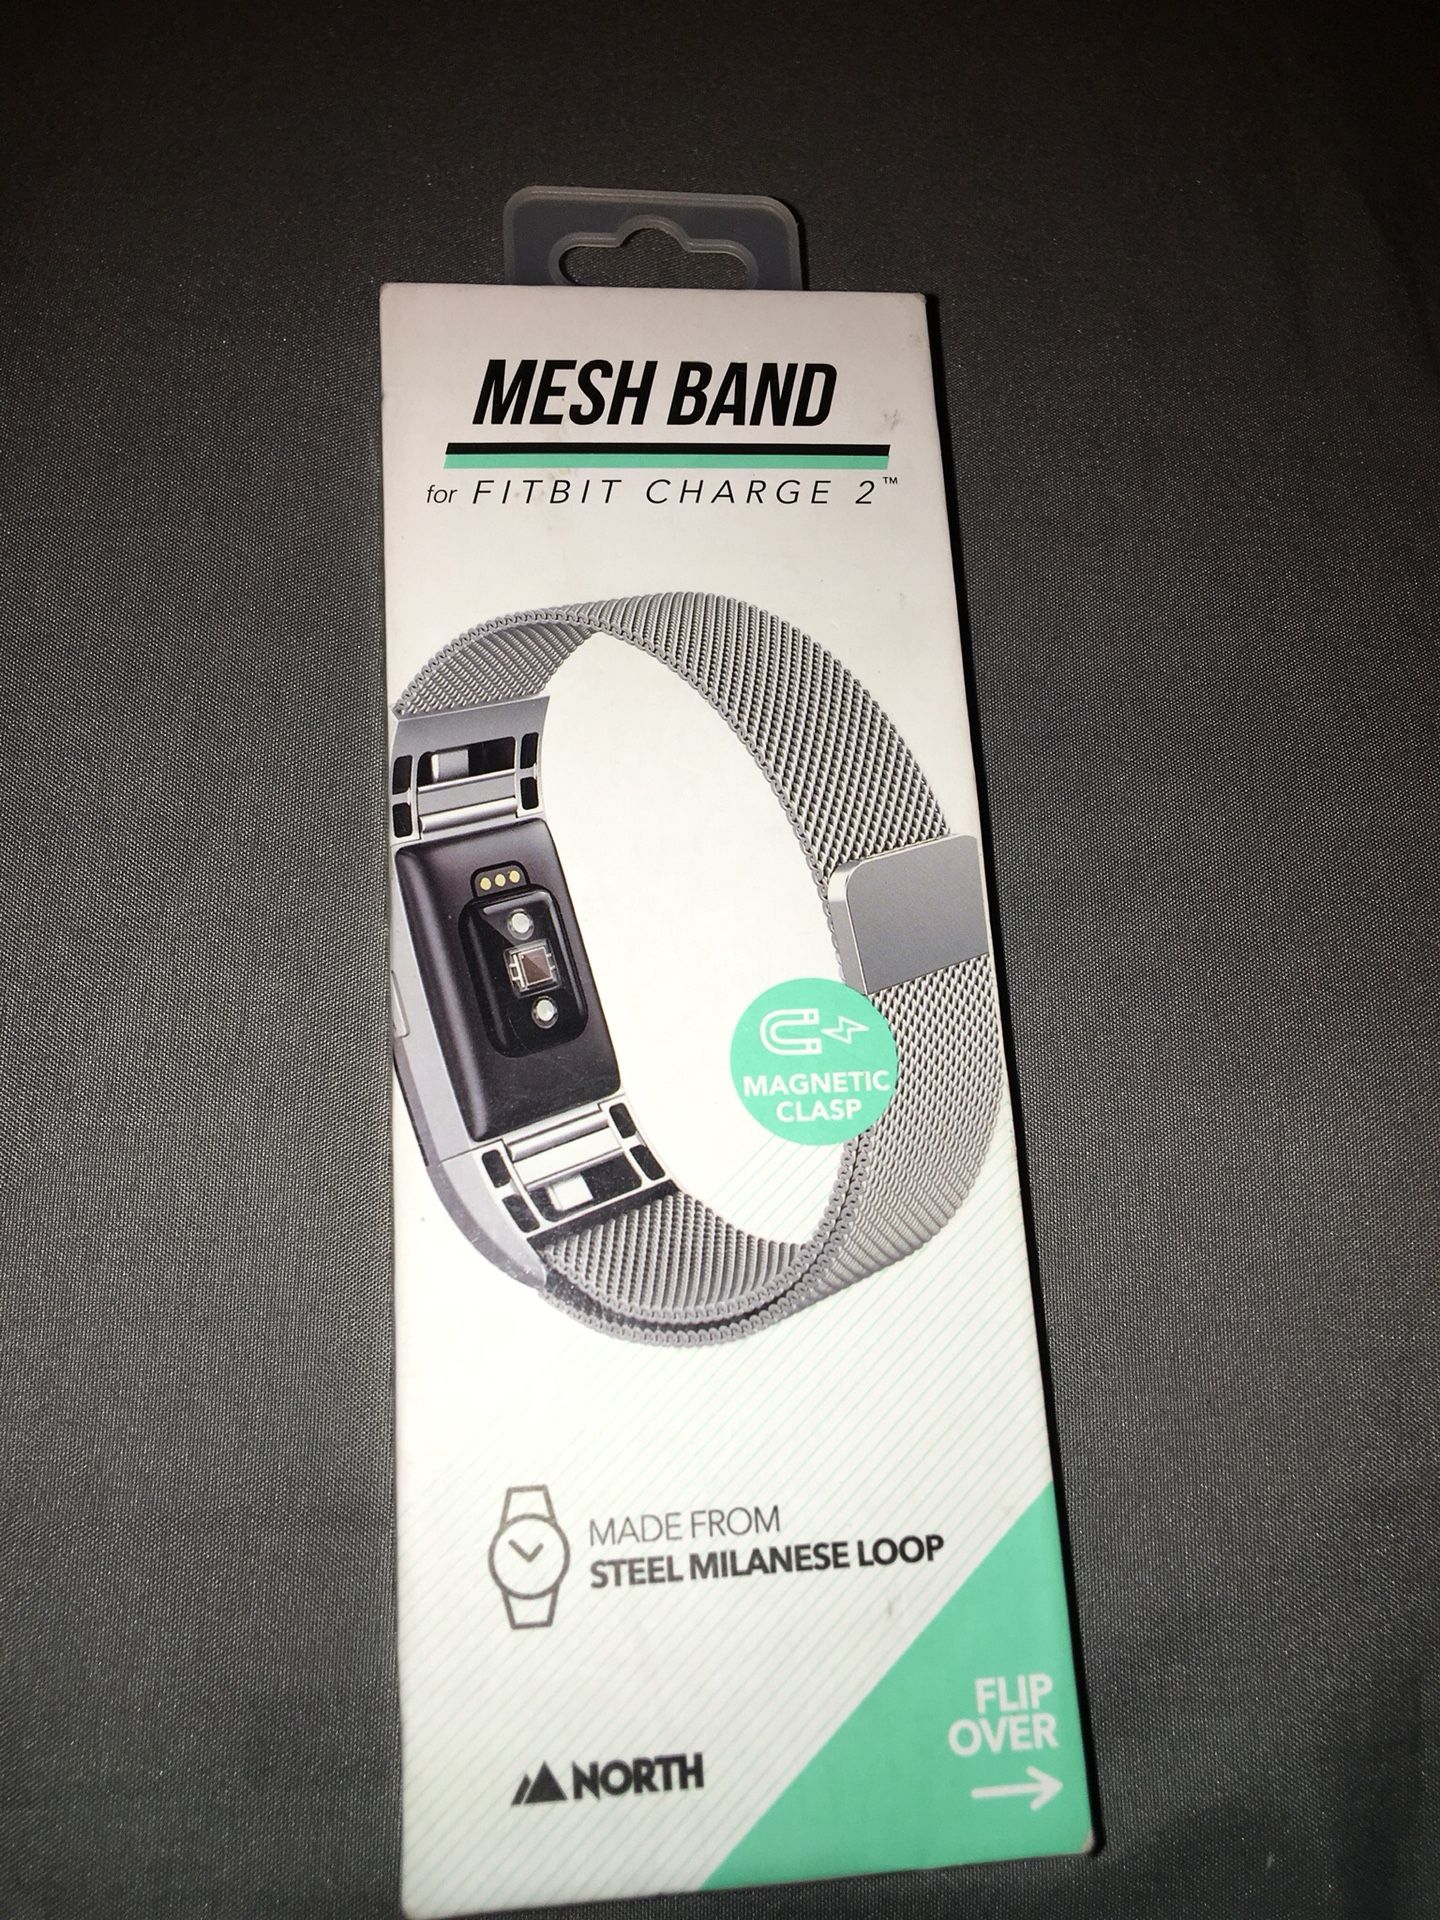 Fitbit Charge 2 mesh band